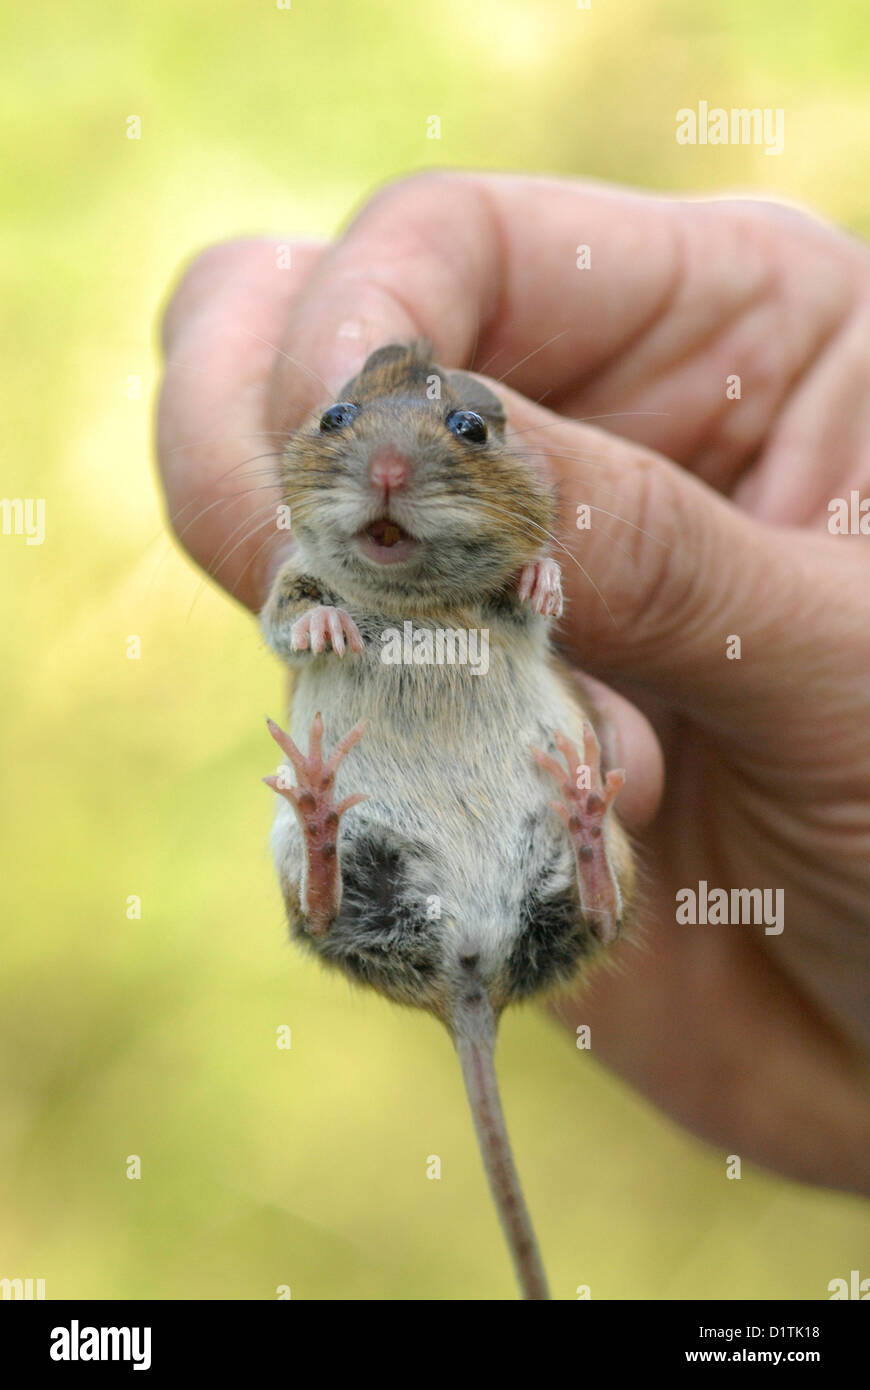 Wood Mouse (Apodemus sylvaticus) being held for scientific examination Stock Photo